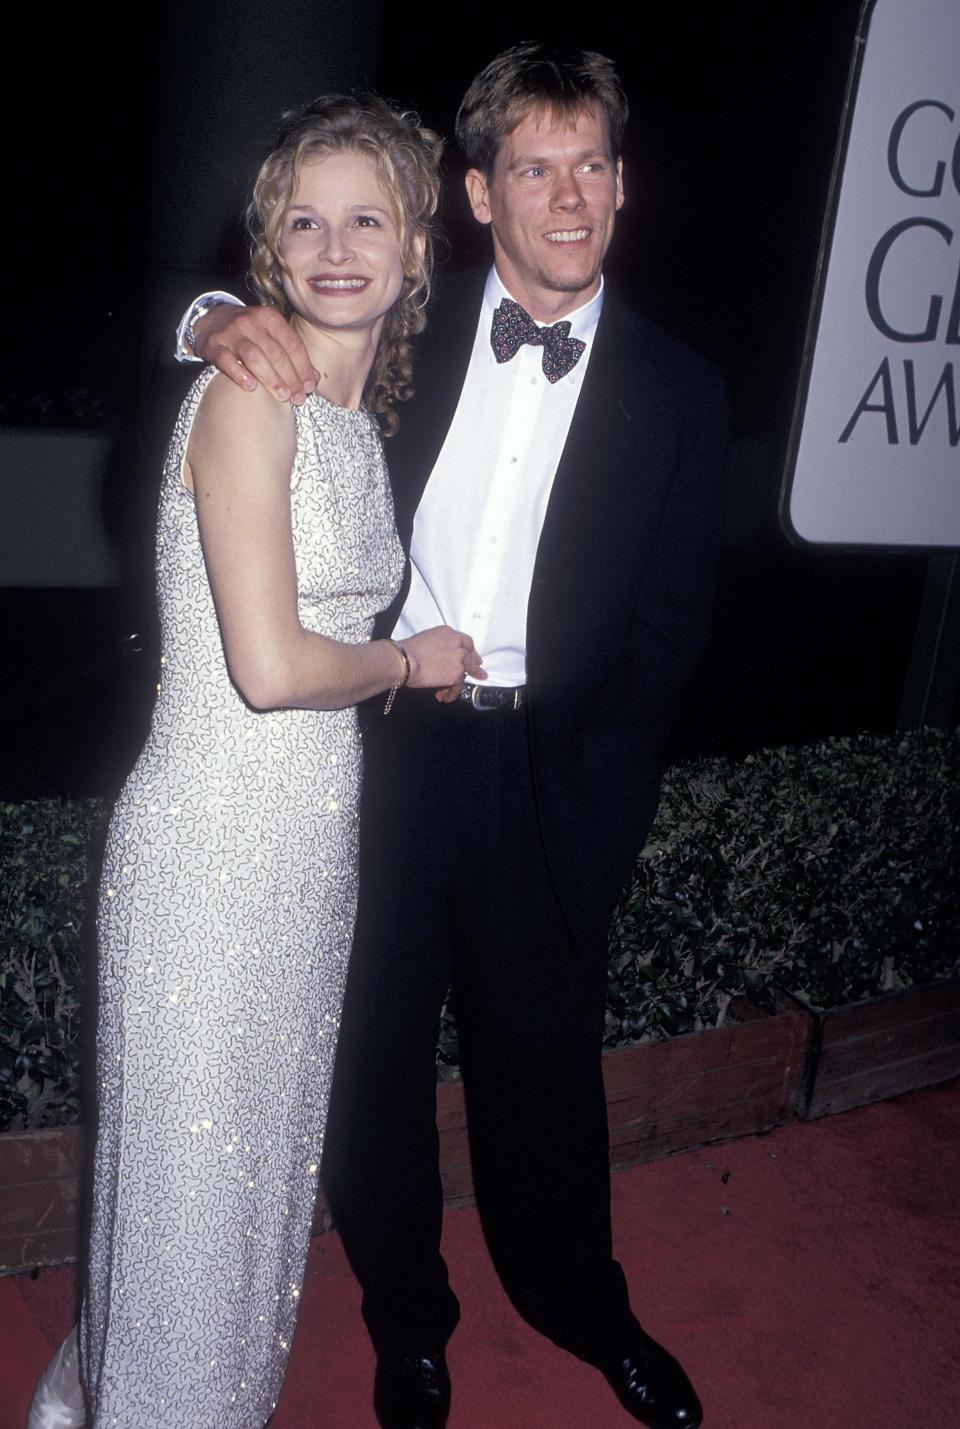 Kyra Sedgwick in a dress standing next to Kevin Bacon in a tuxedo